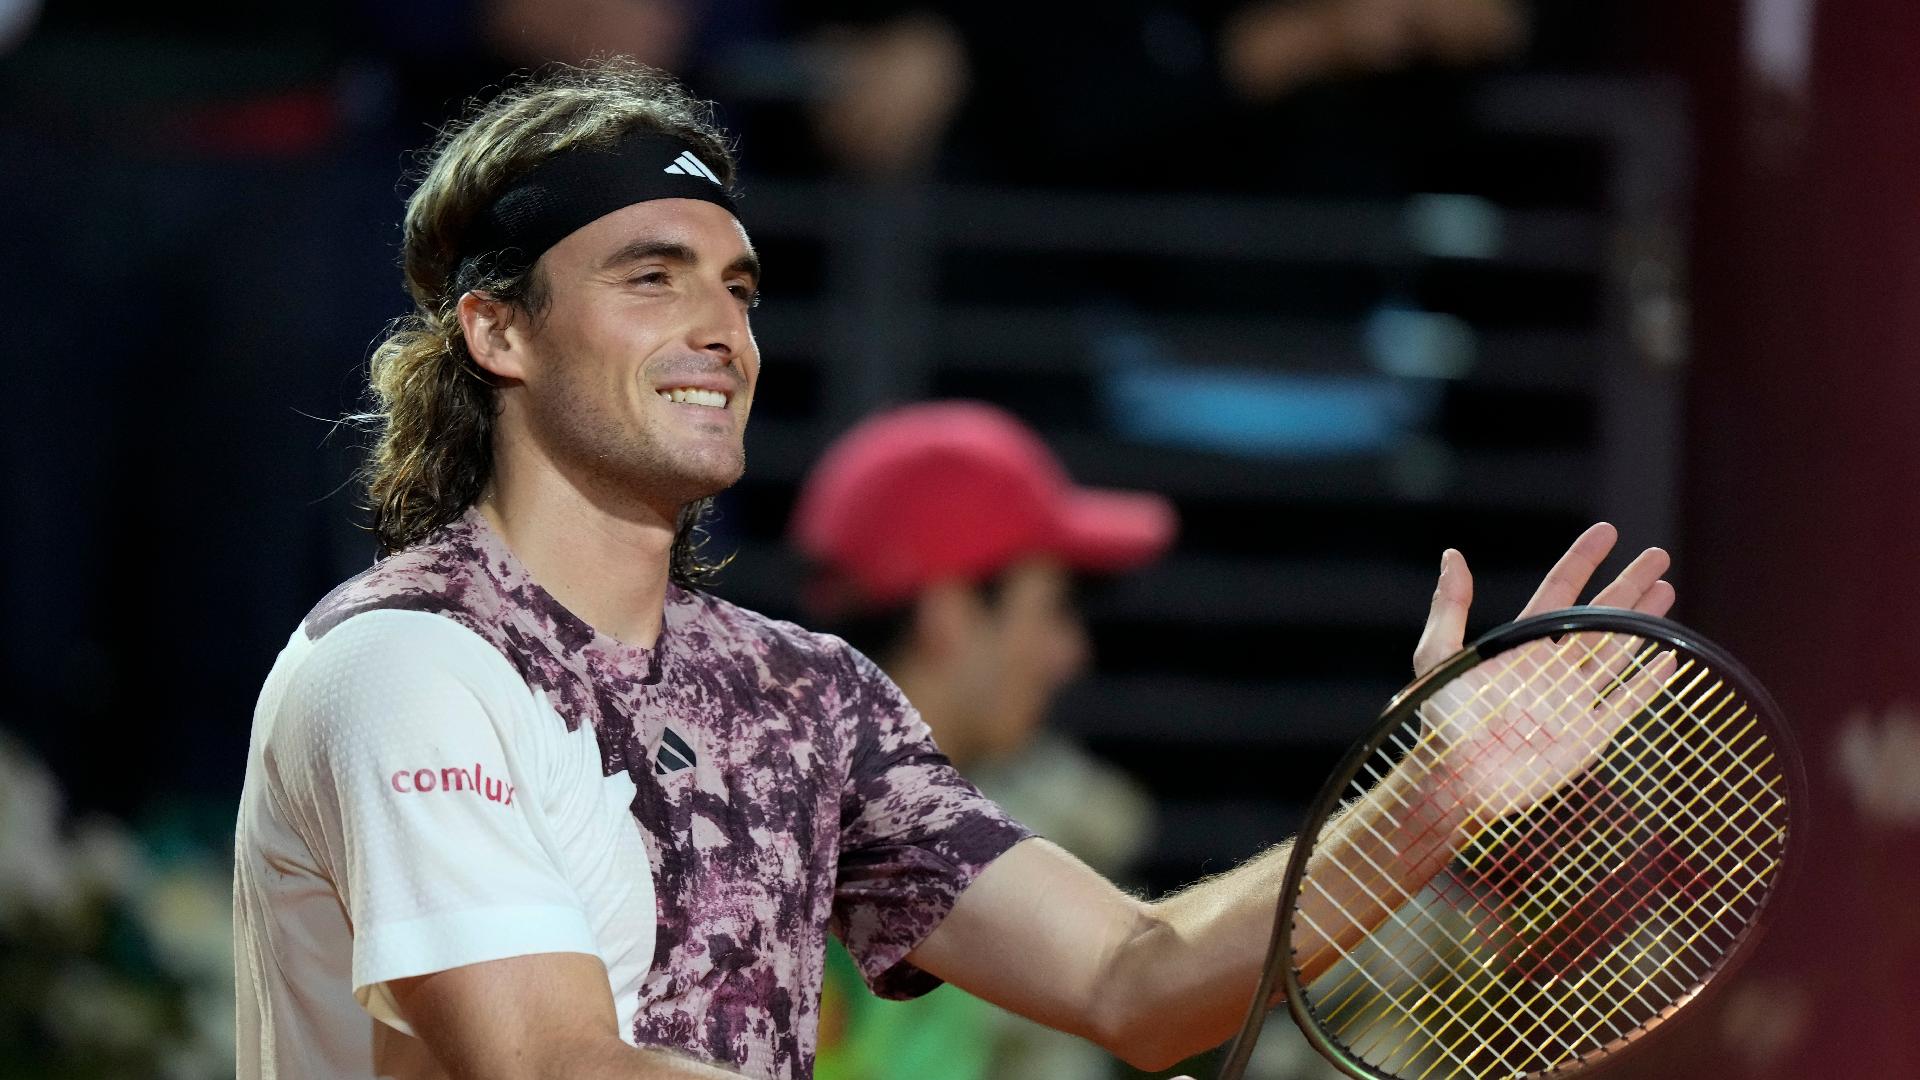 Medvedev-Tsitsipas showdown highlights French Open schedule - The